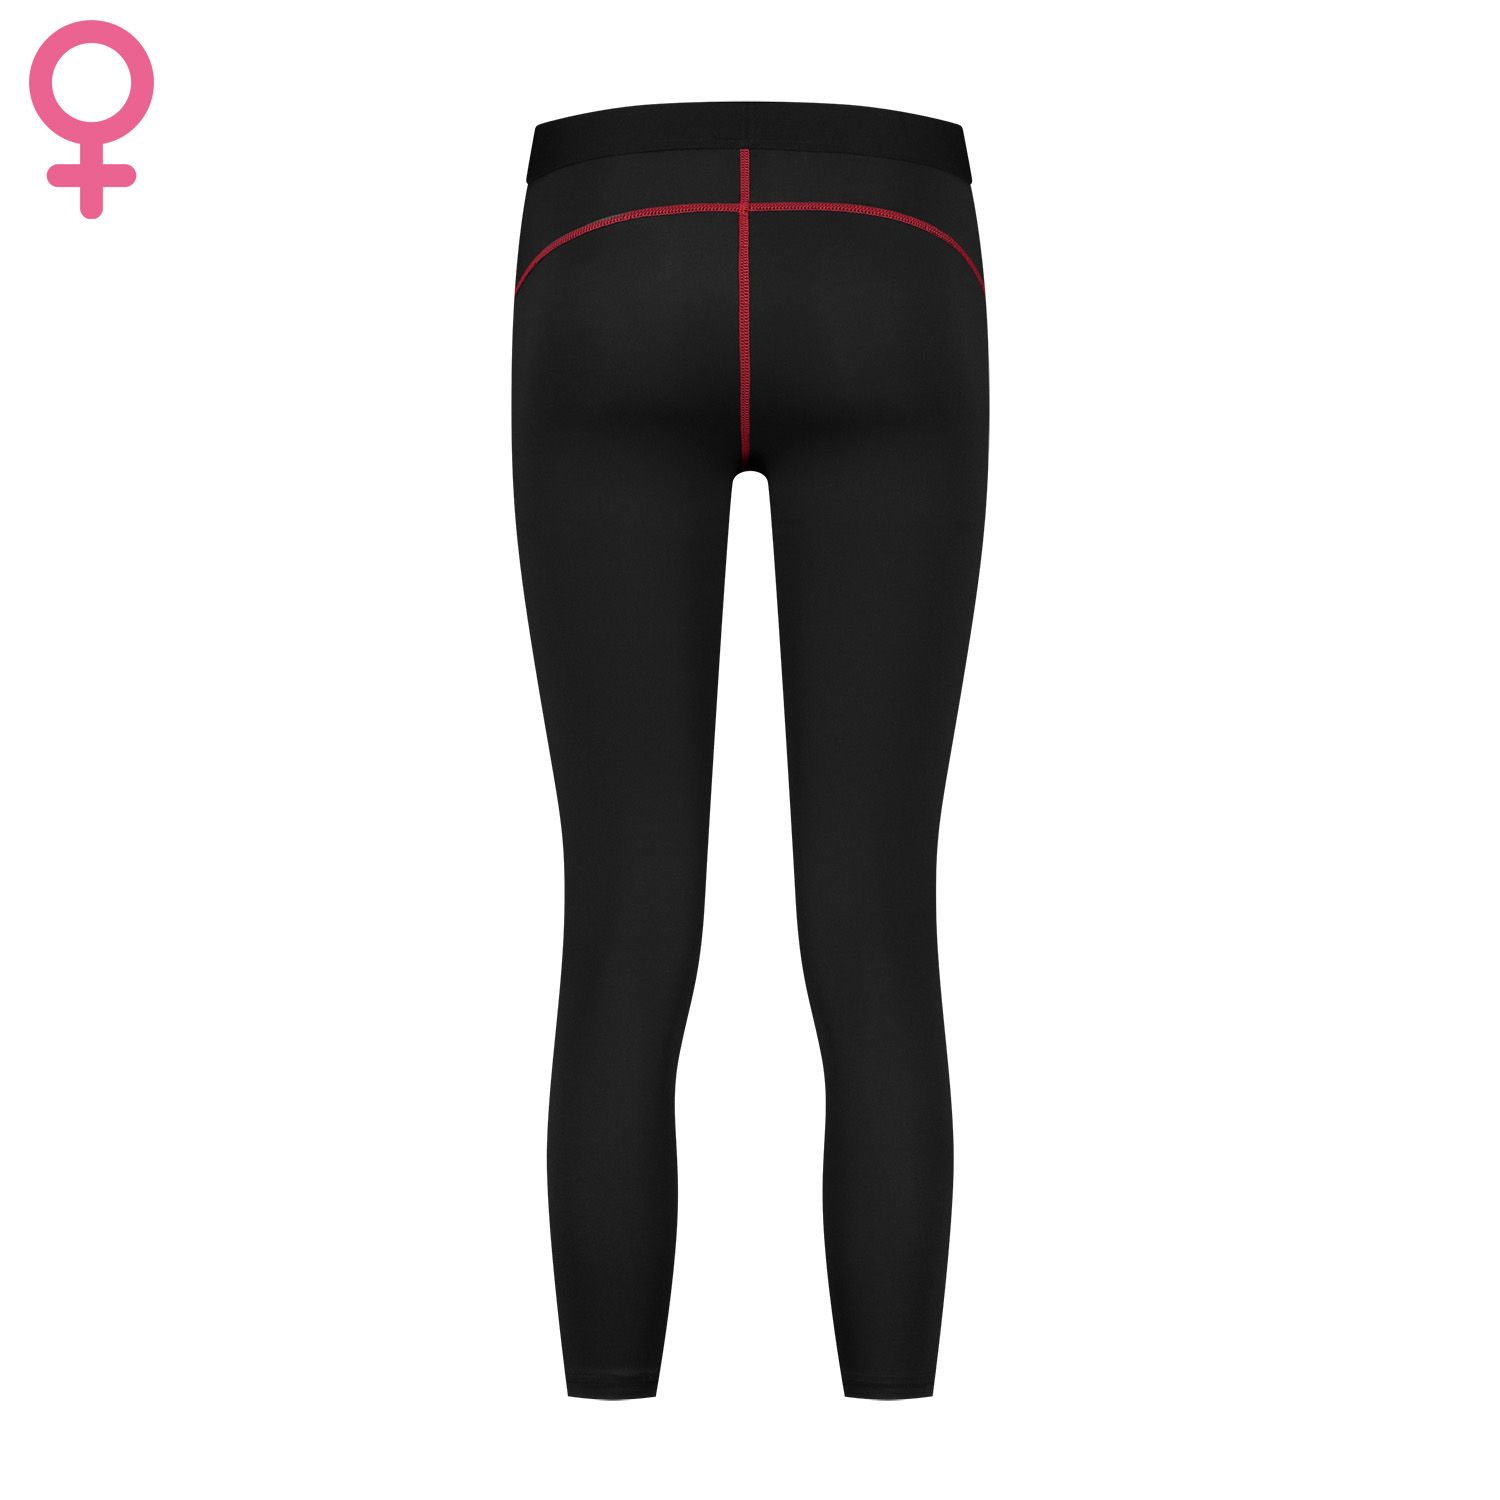 gladiator sports compression tights long woman back